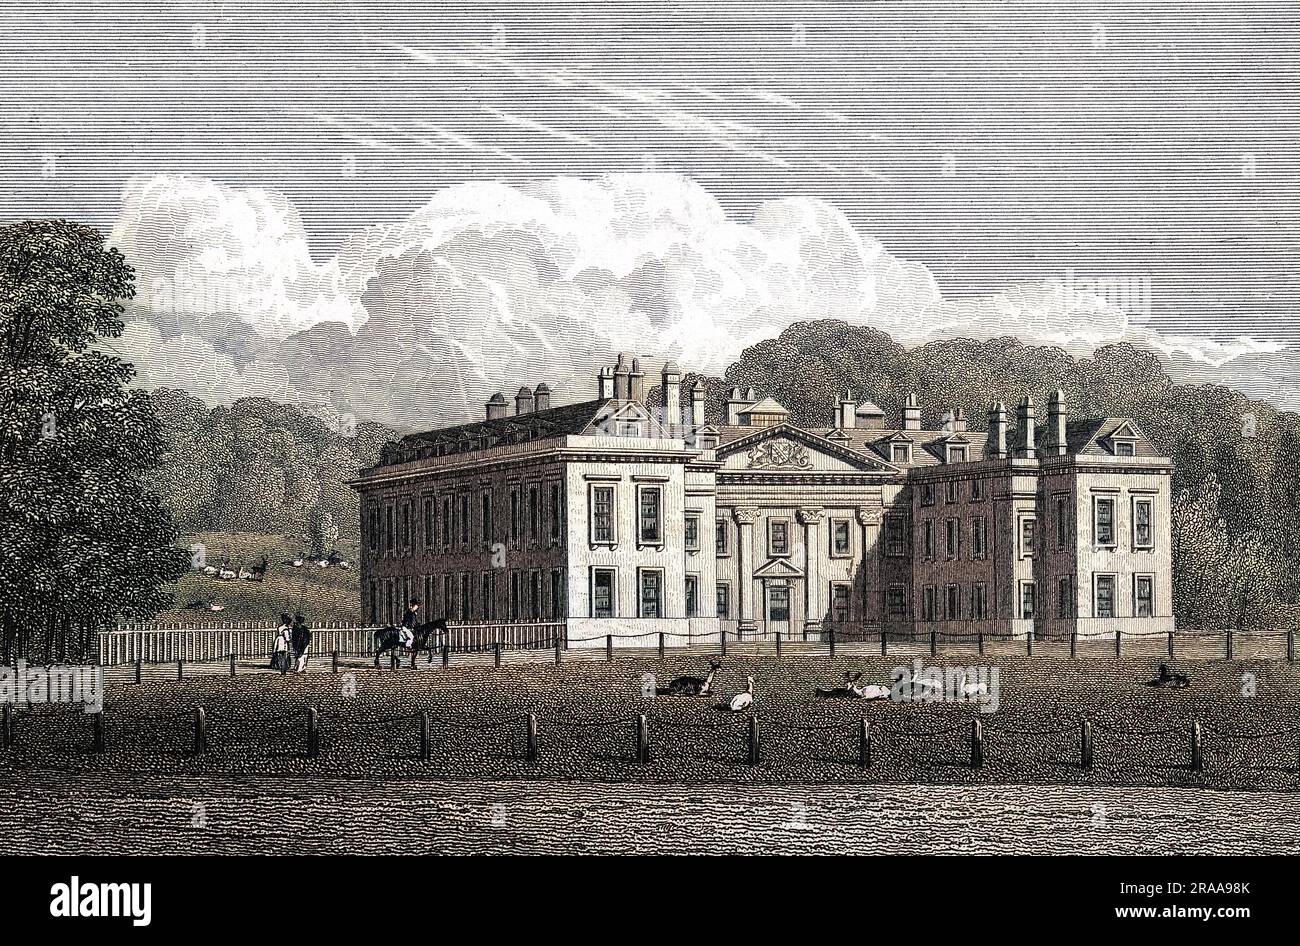 Althorp, Northamptonshire, the seat of earl Spencer, and in time to come the home of Diana, the ill-fated princess of Wales.     Date: early 19th century Stock Photo